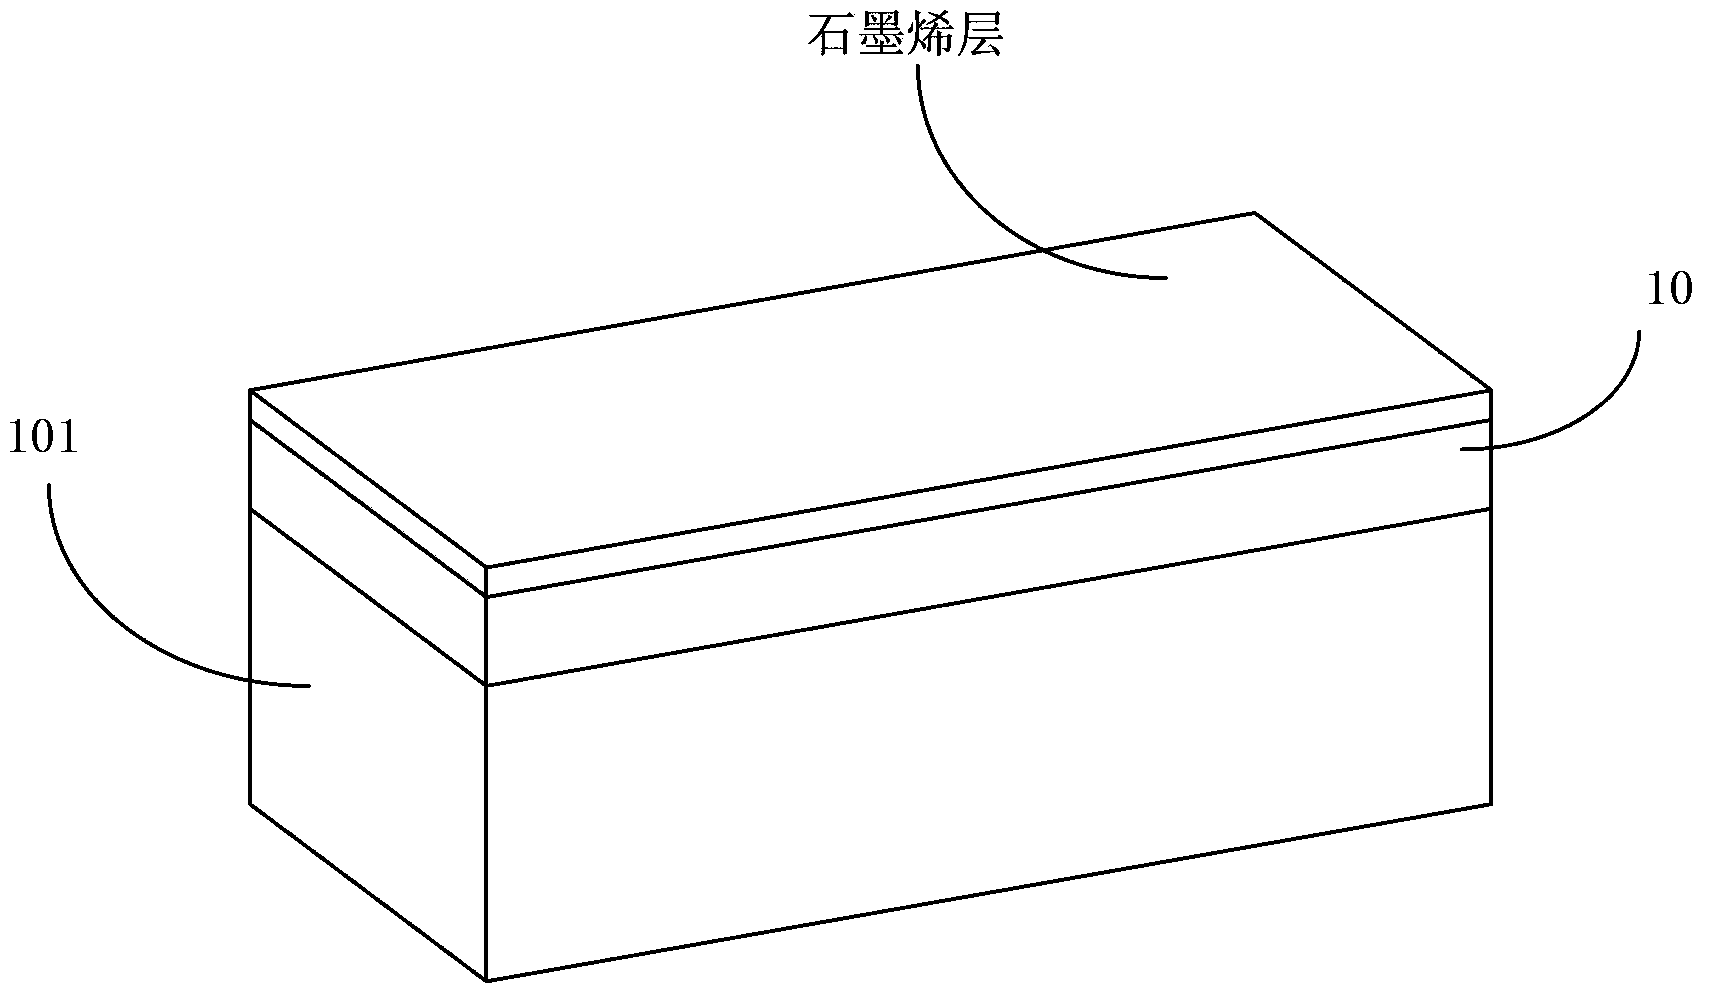 Double-gate fin-type field effect transistor and manufacturing method thereof